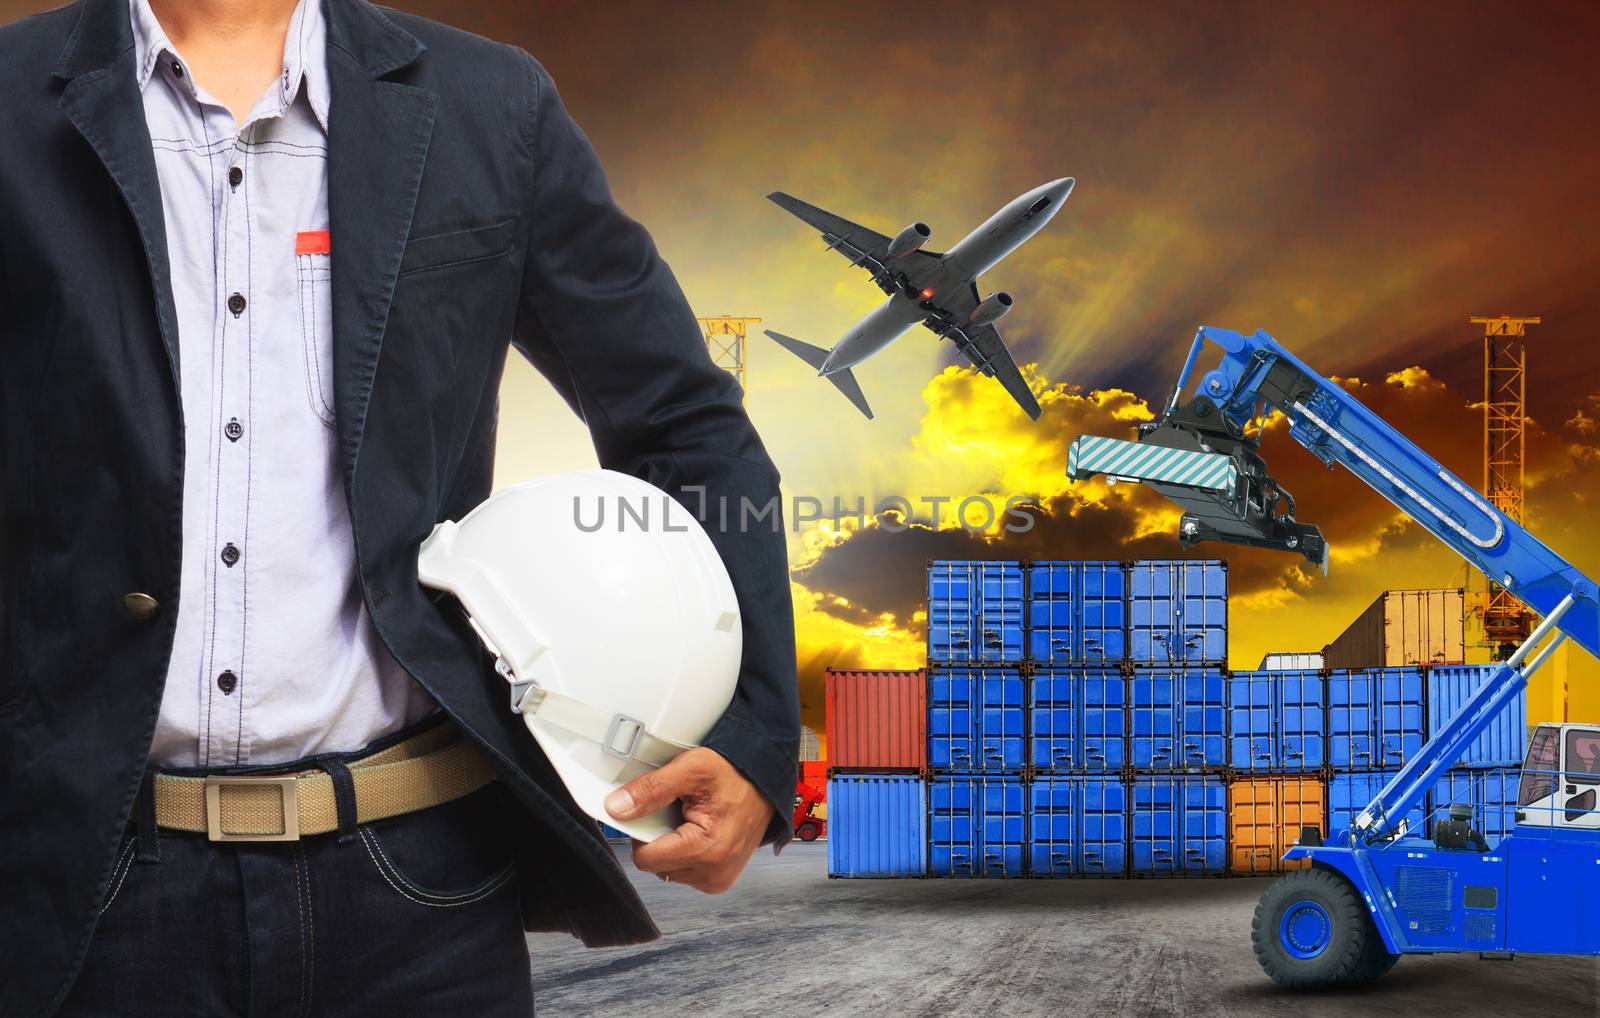 working man and container dock in land ,air cargo logistic freight industry